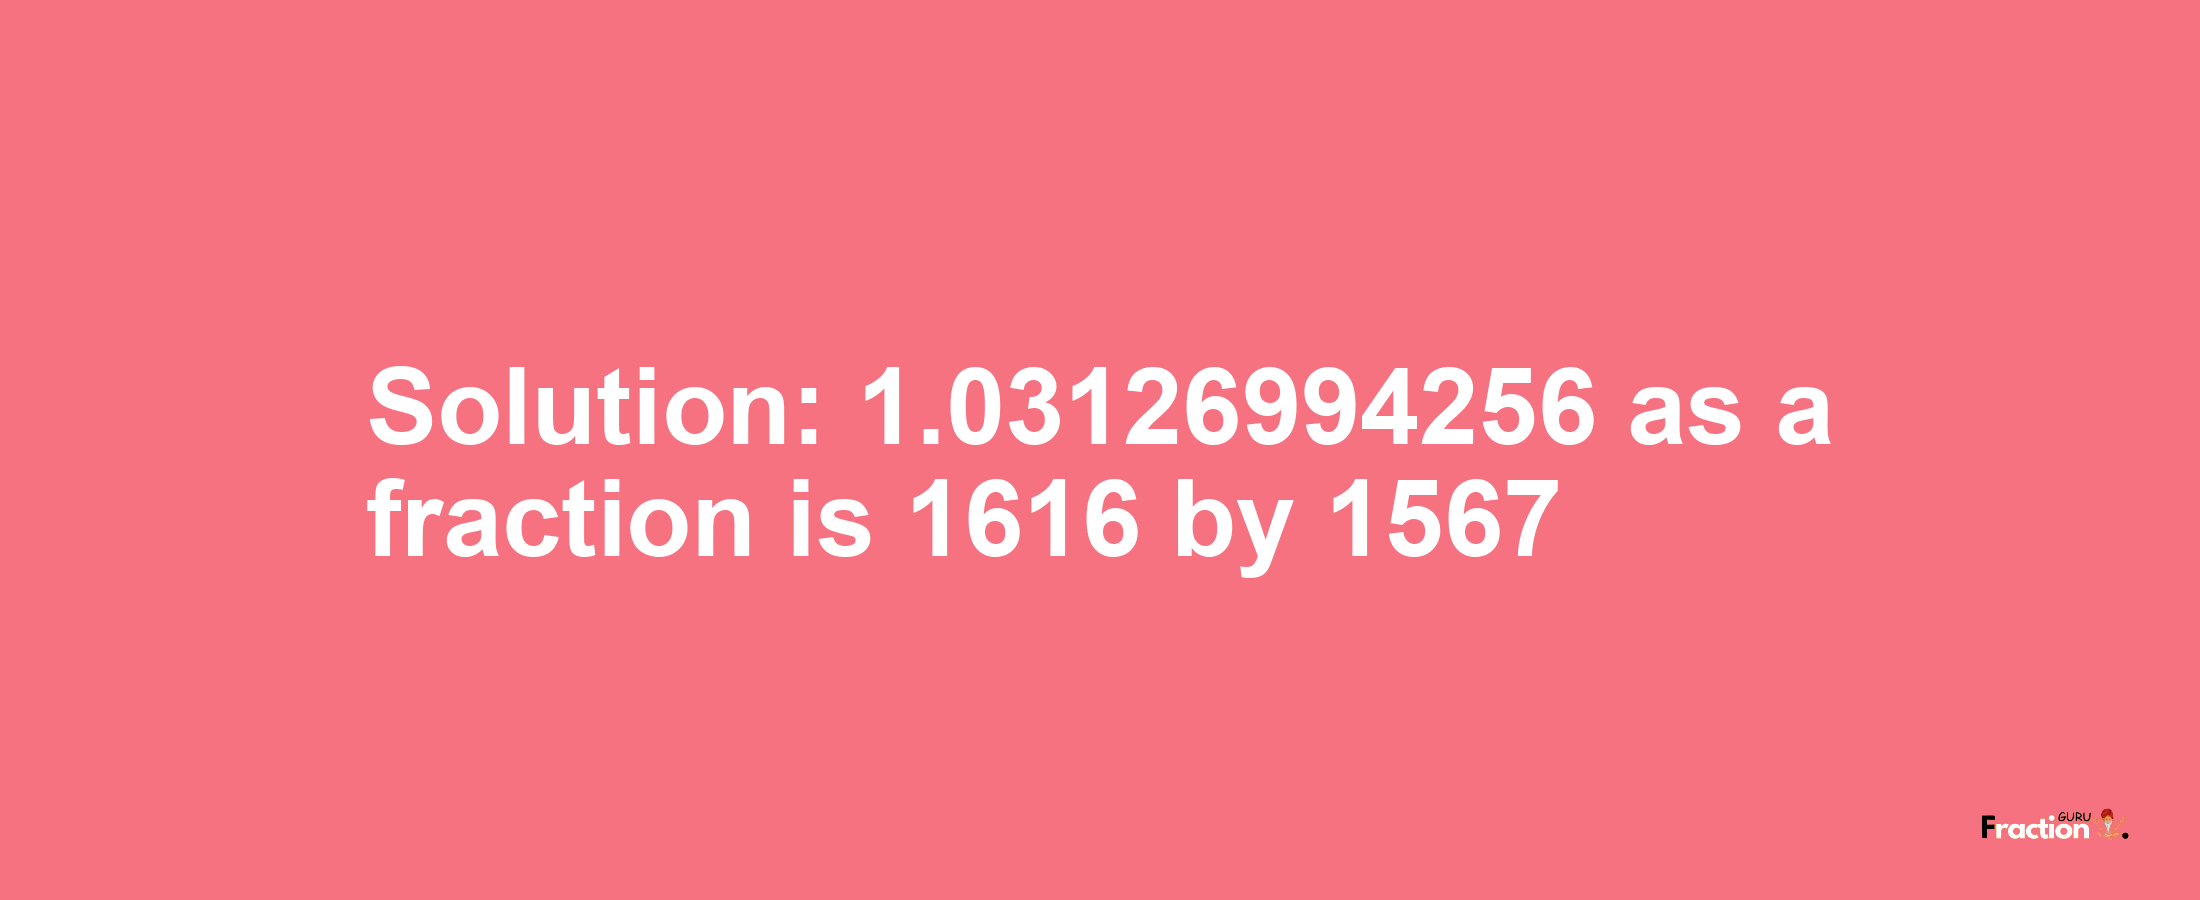 Solution:1.03126994256 as a fraction is 1616/1567